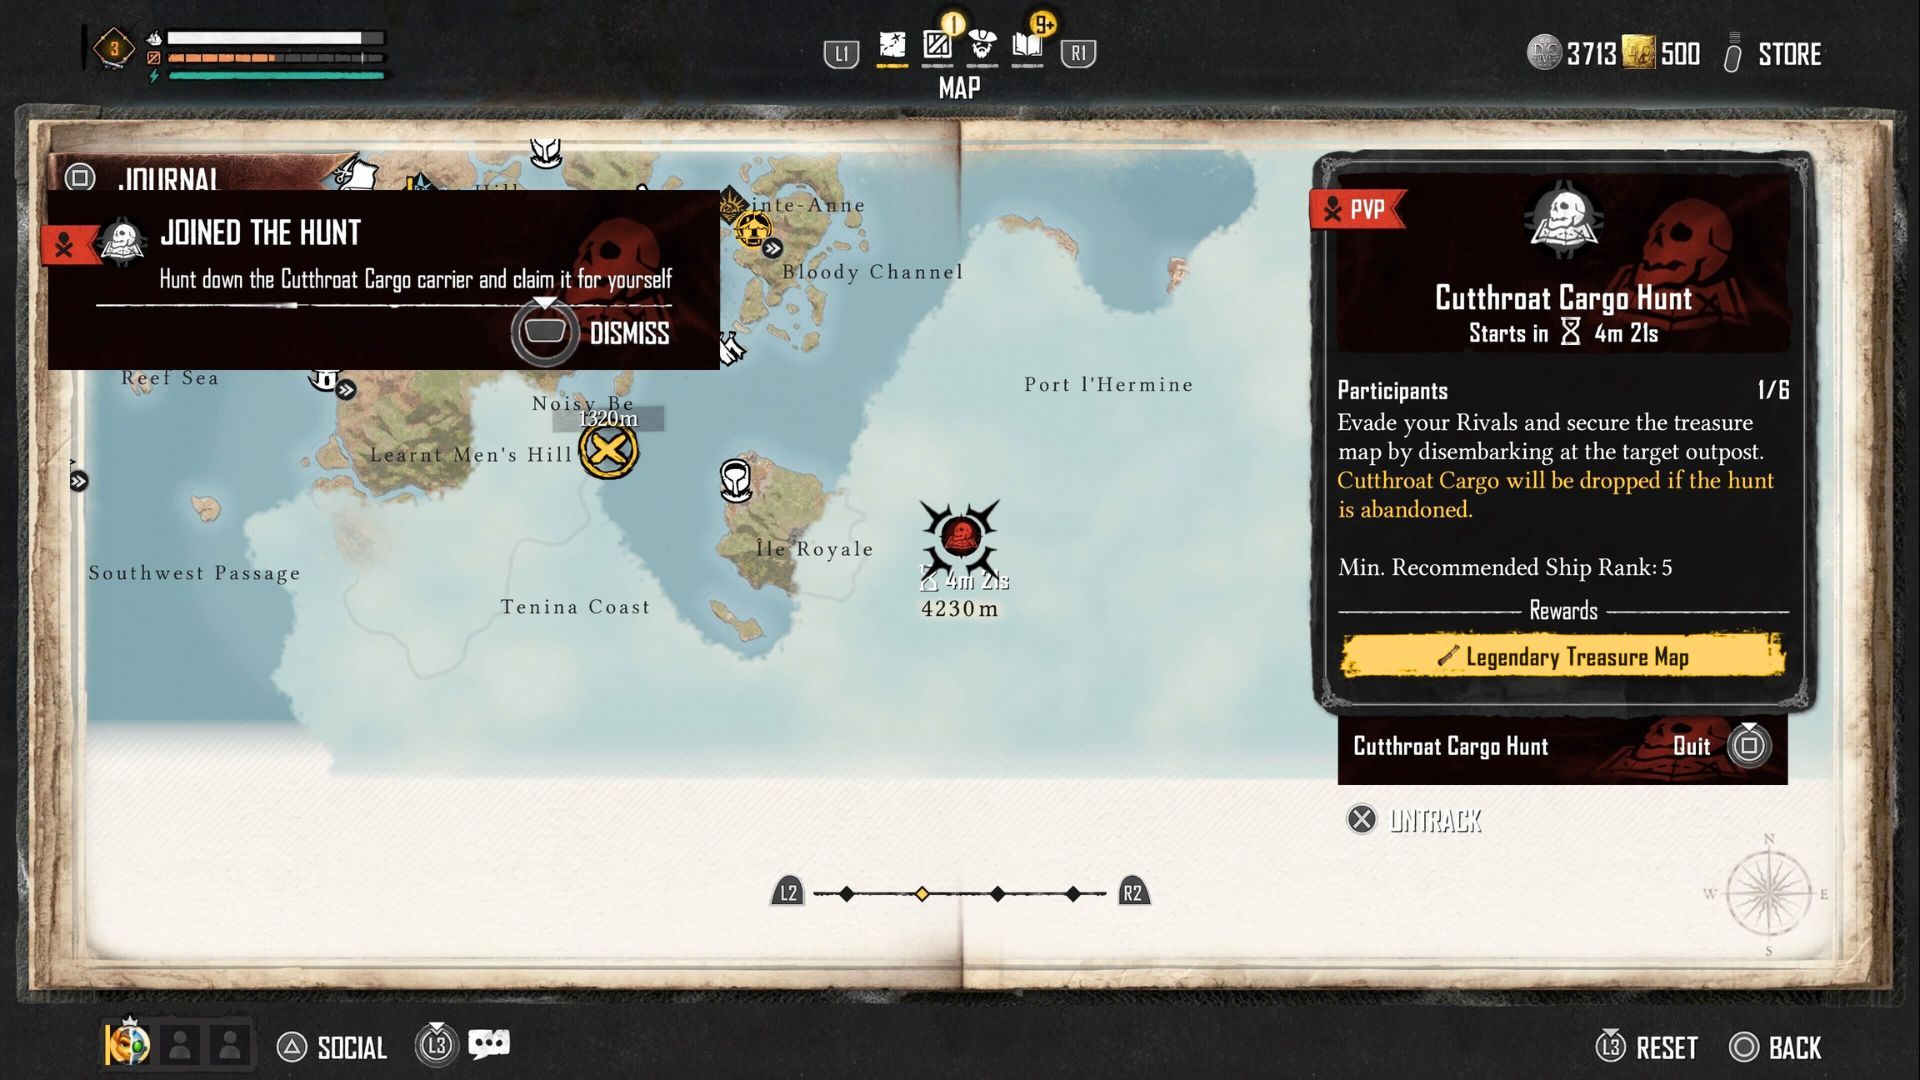 A Skull and Bones map showing the starting point of the Cutthroat Cargo Hunt